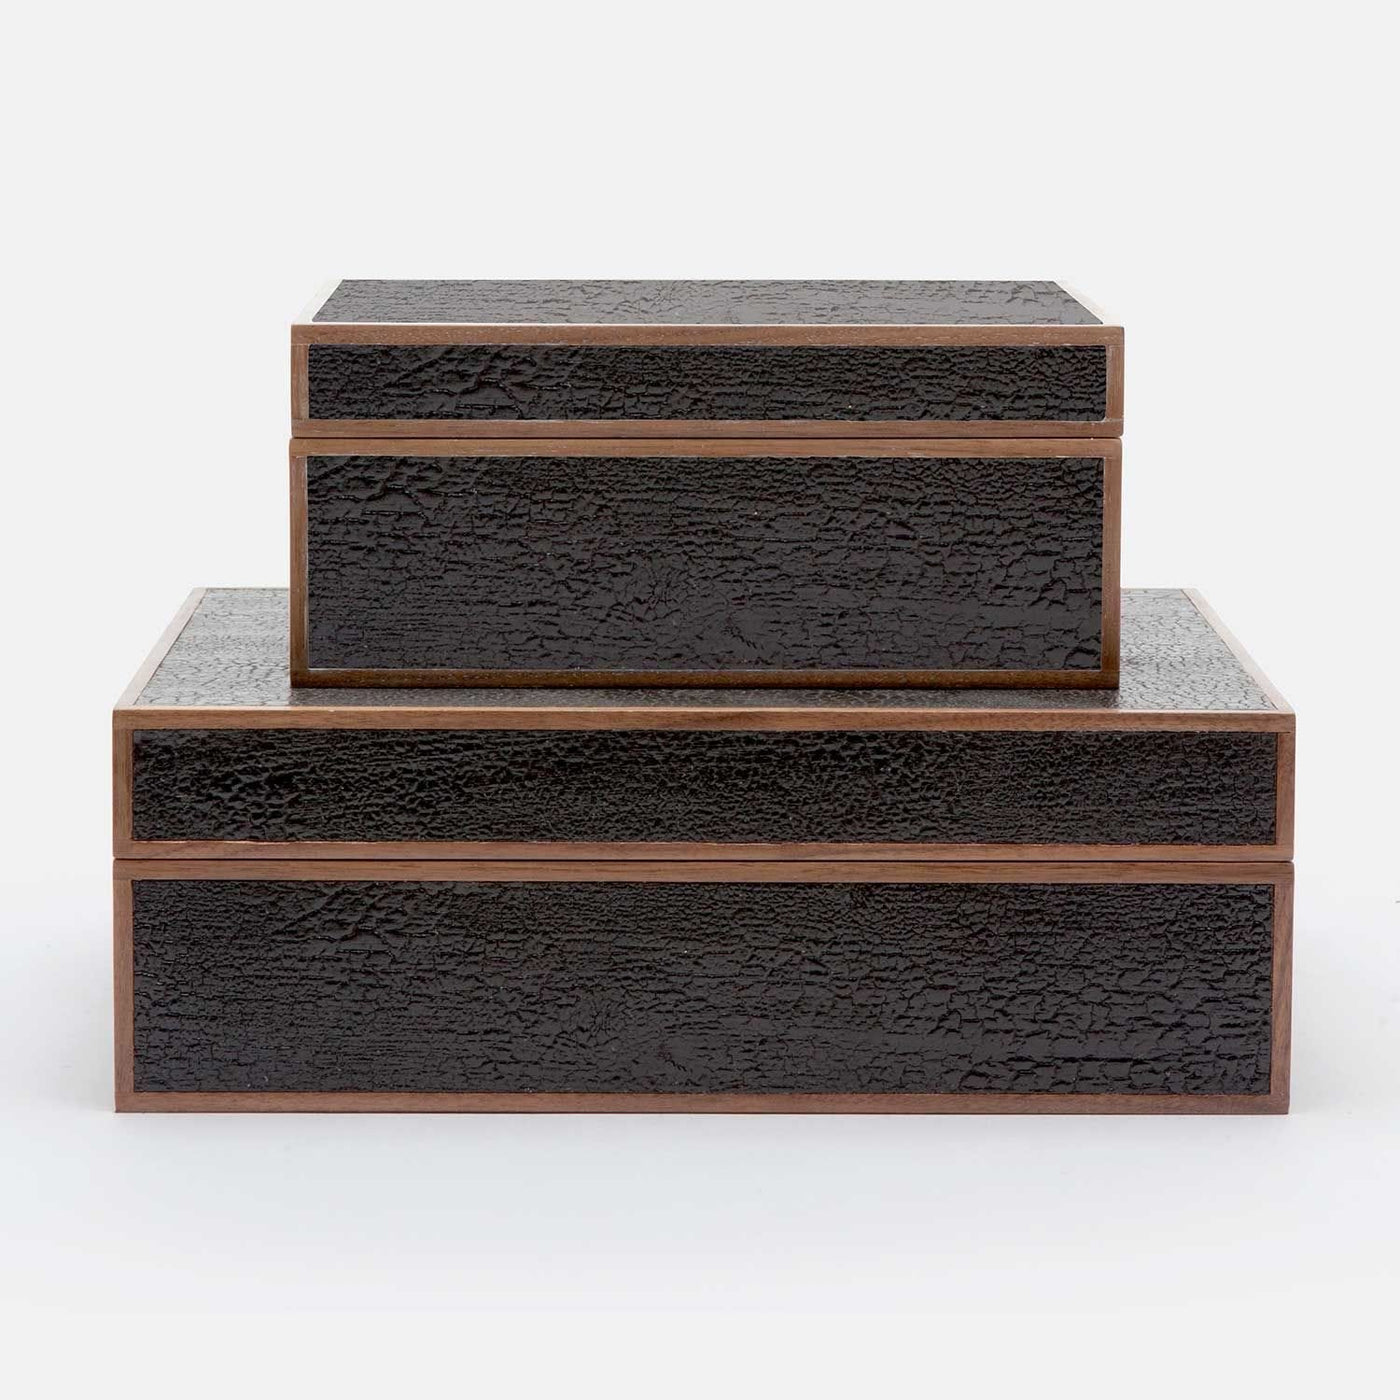 BOX BLACK BURNT WOOD (Available in 2 Sizes)